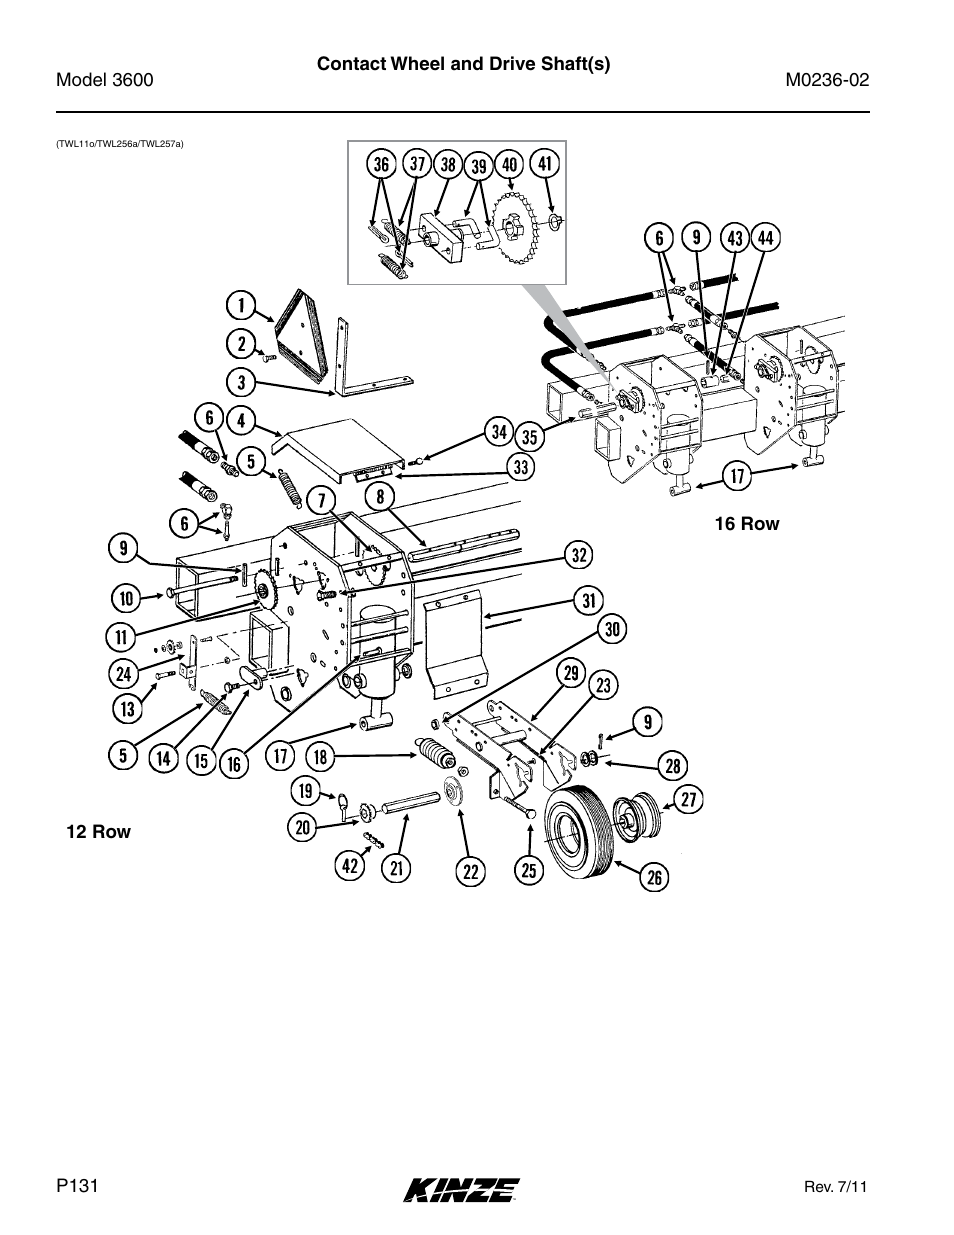 Contact wheel and drive shaft(s) | Kinze 3600 Lift and Rotate Planter Rev. 5/14 User Manual | Page 134 / 302